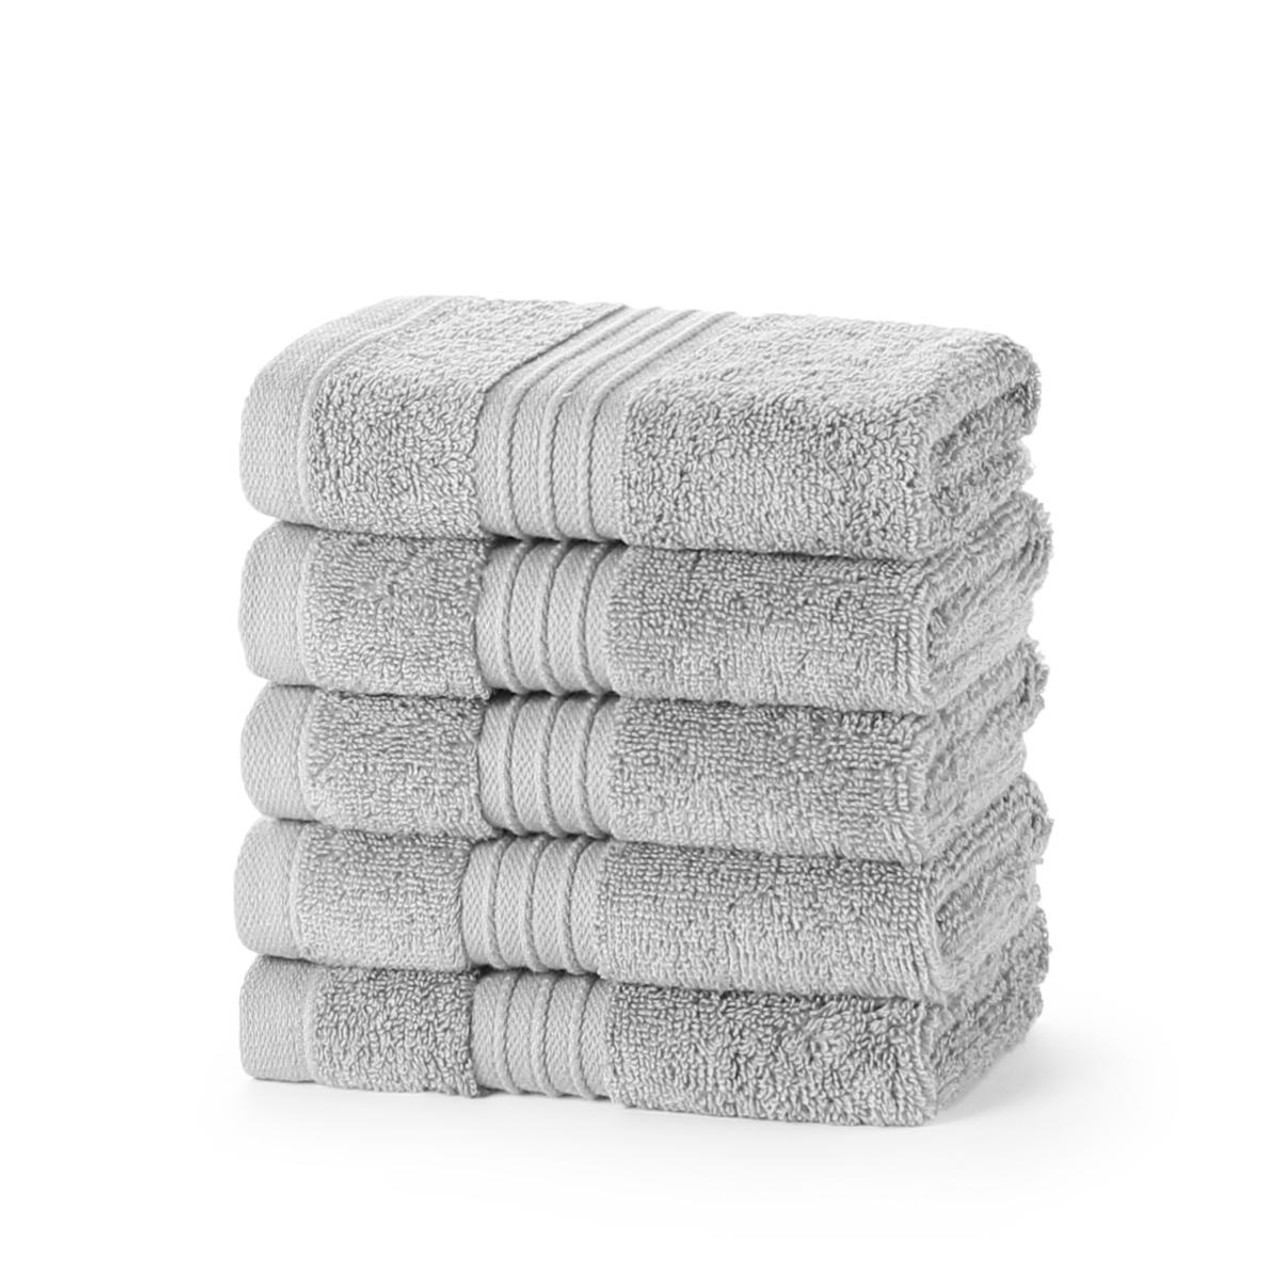 50 x White Face Cloth Towel 500 GSM Flannels Wash Cloth 100% Egyptian Cotton 